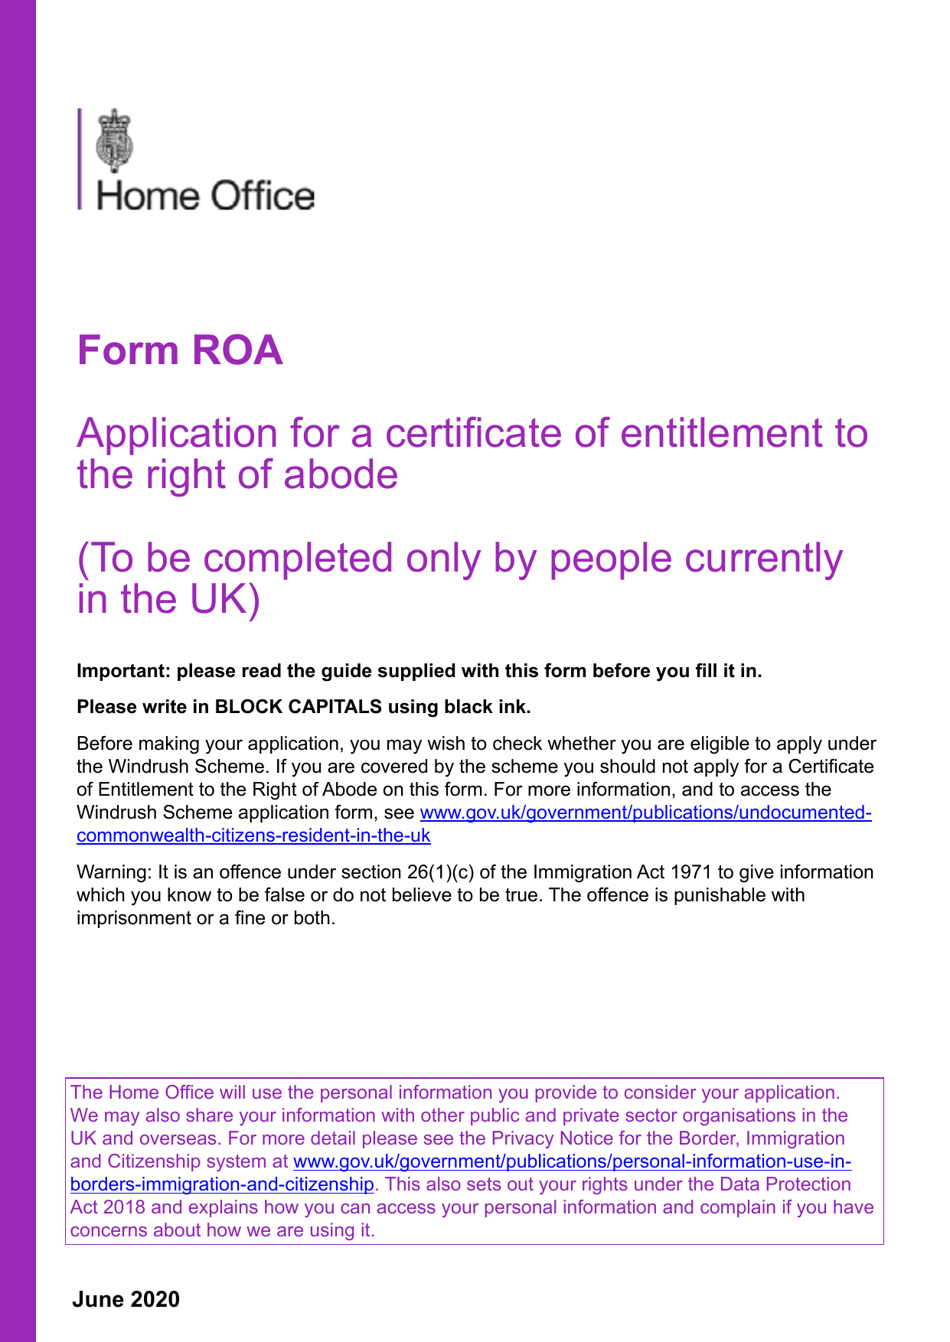 Form ROA Application for a Certificate of Entitlement to the Right of Abode - United Kingdom, Page 1